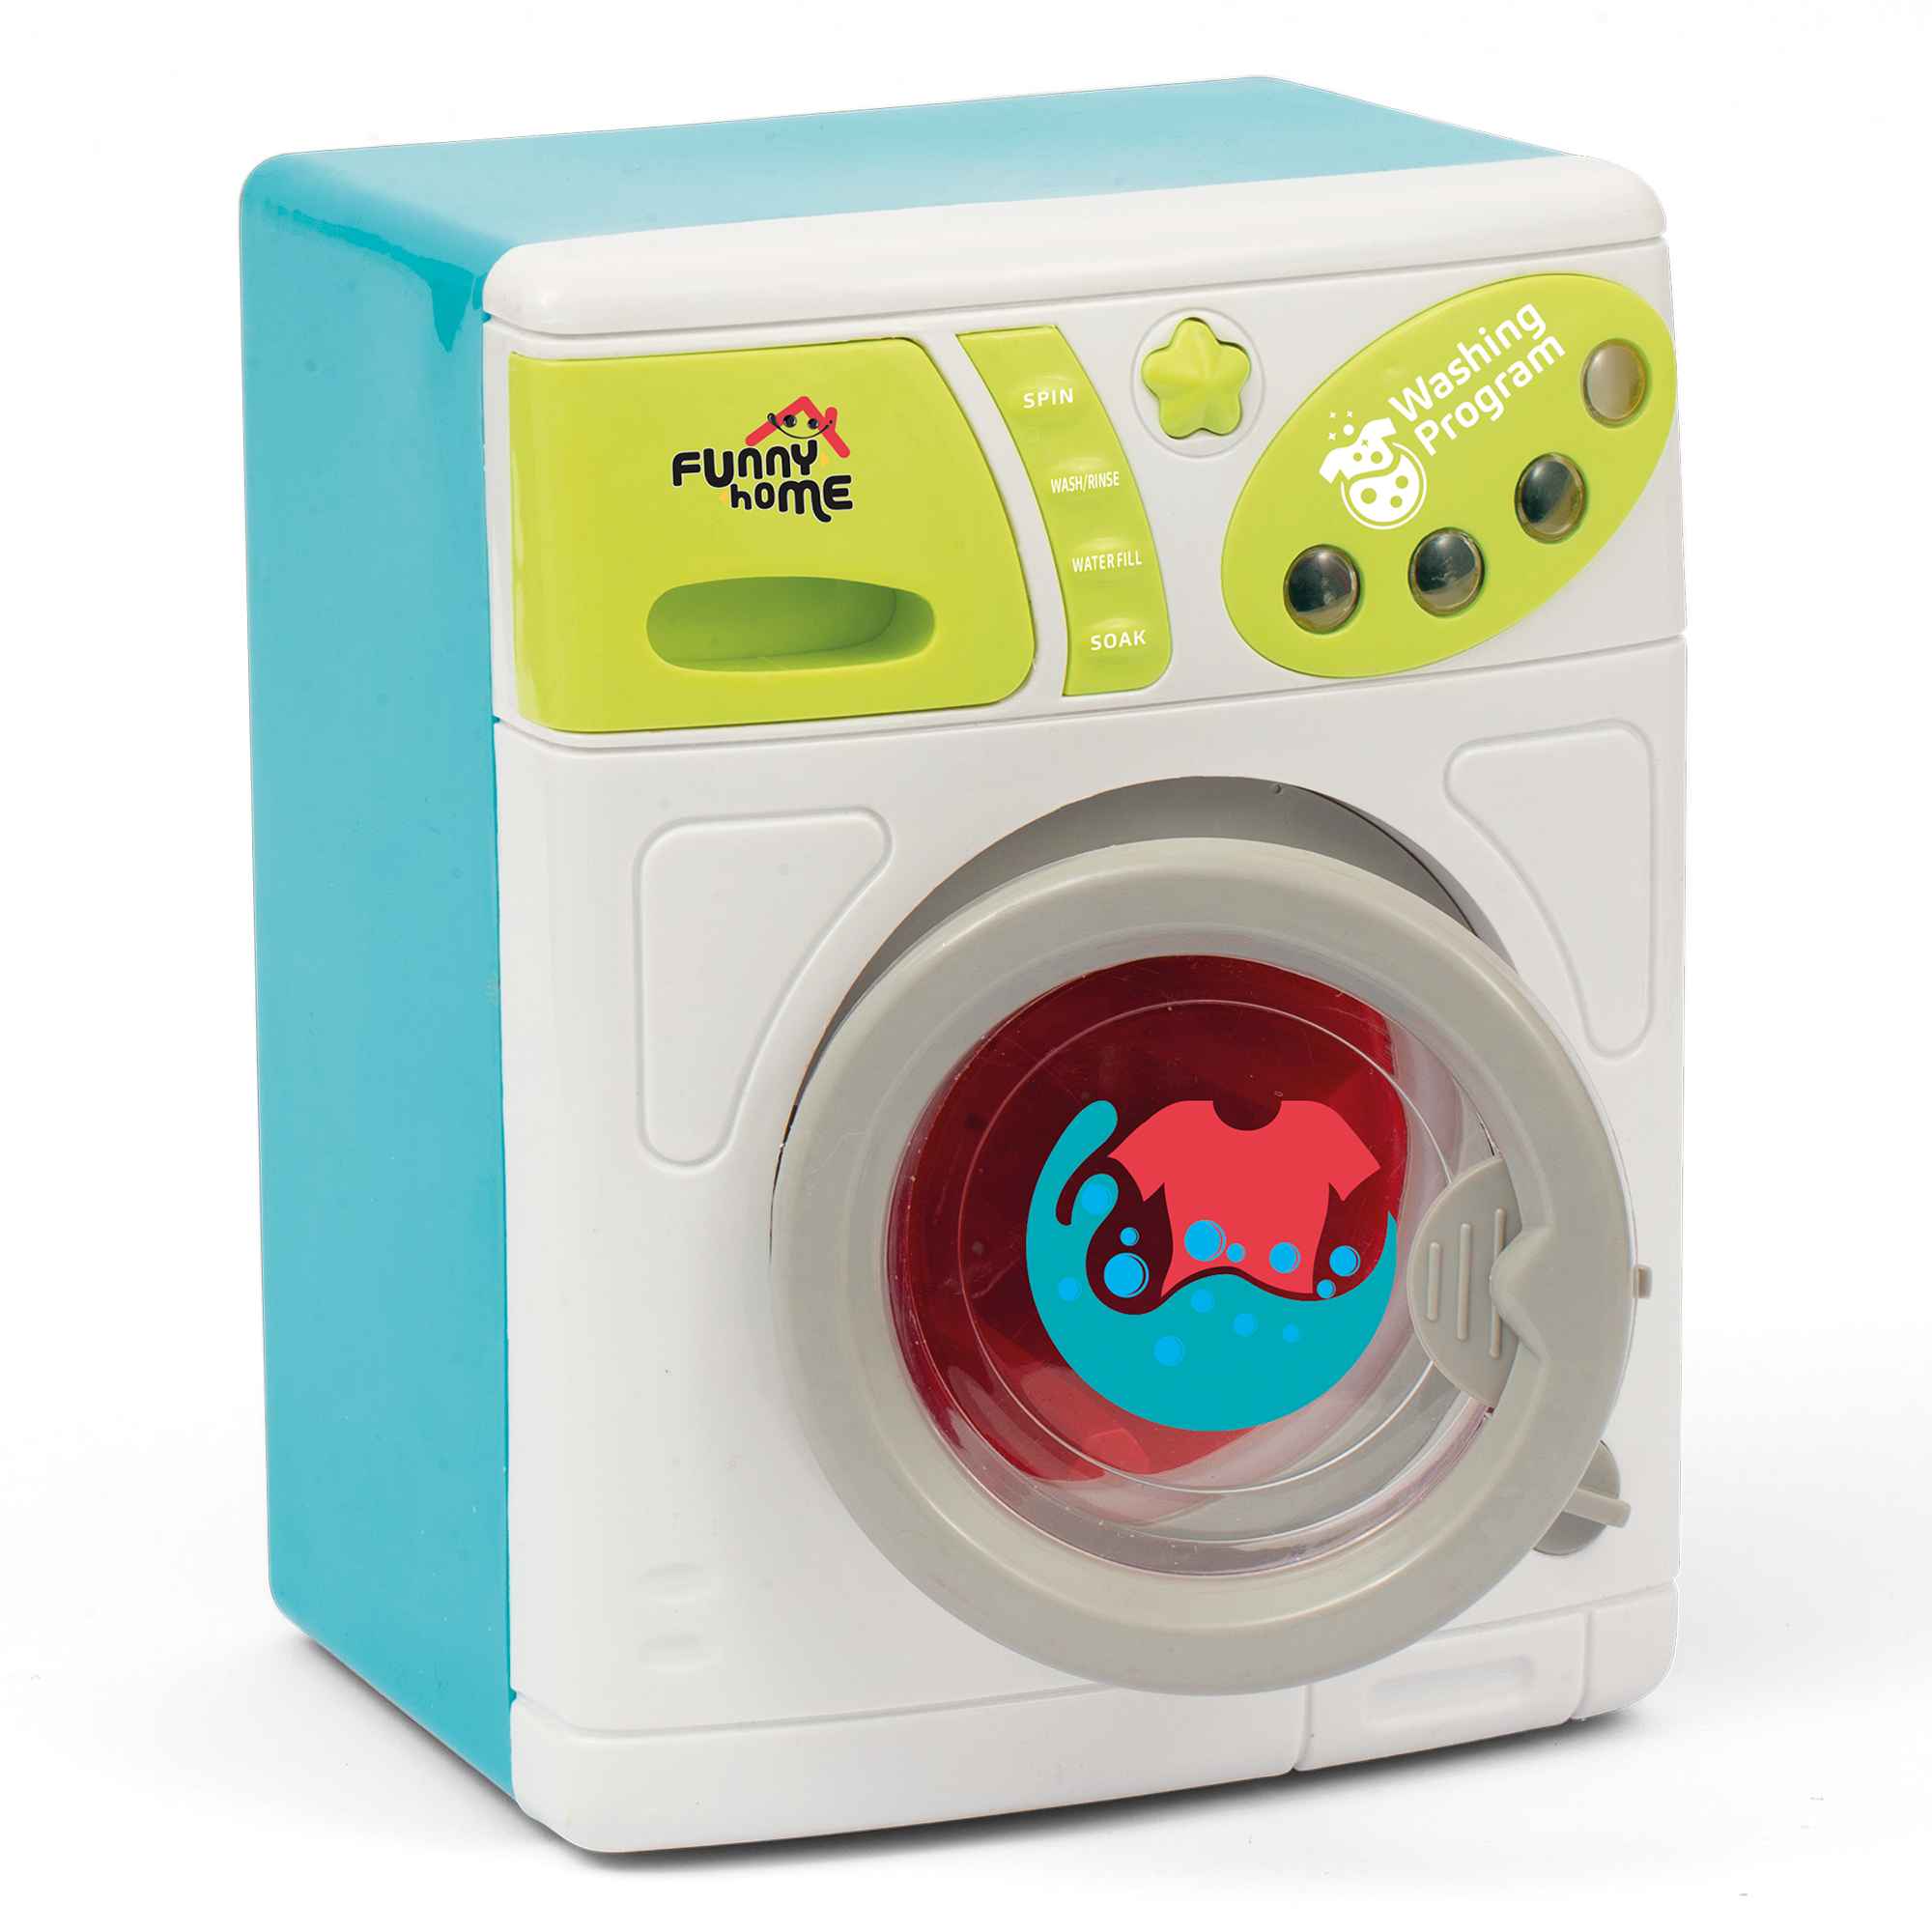 Funny Home Παιδικό Laundry Σετ 3 σε 1 με 8 Αξεσουάρ PRG00876 - Funny Home